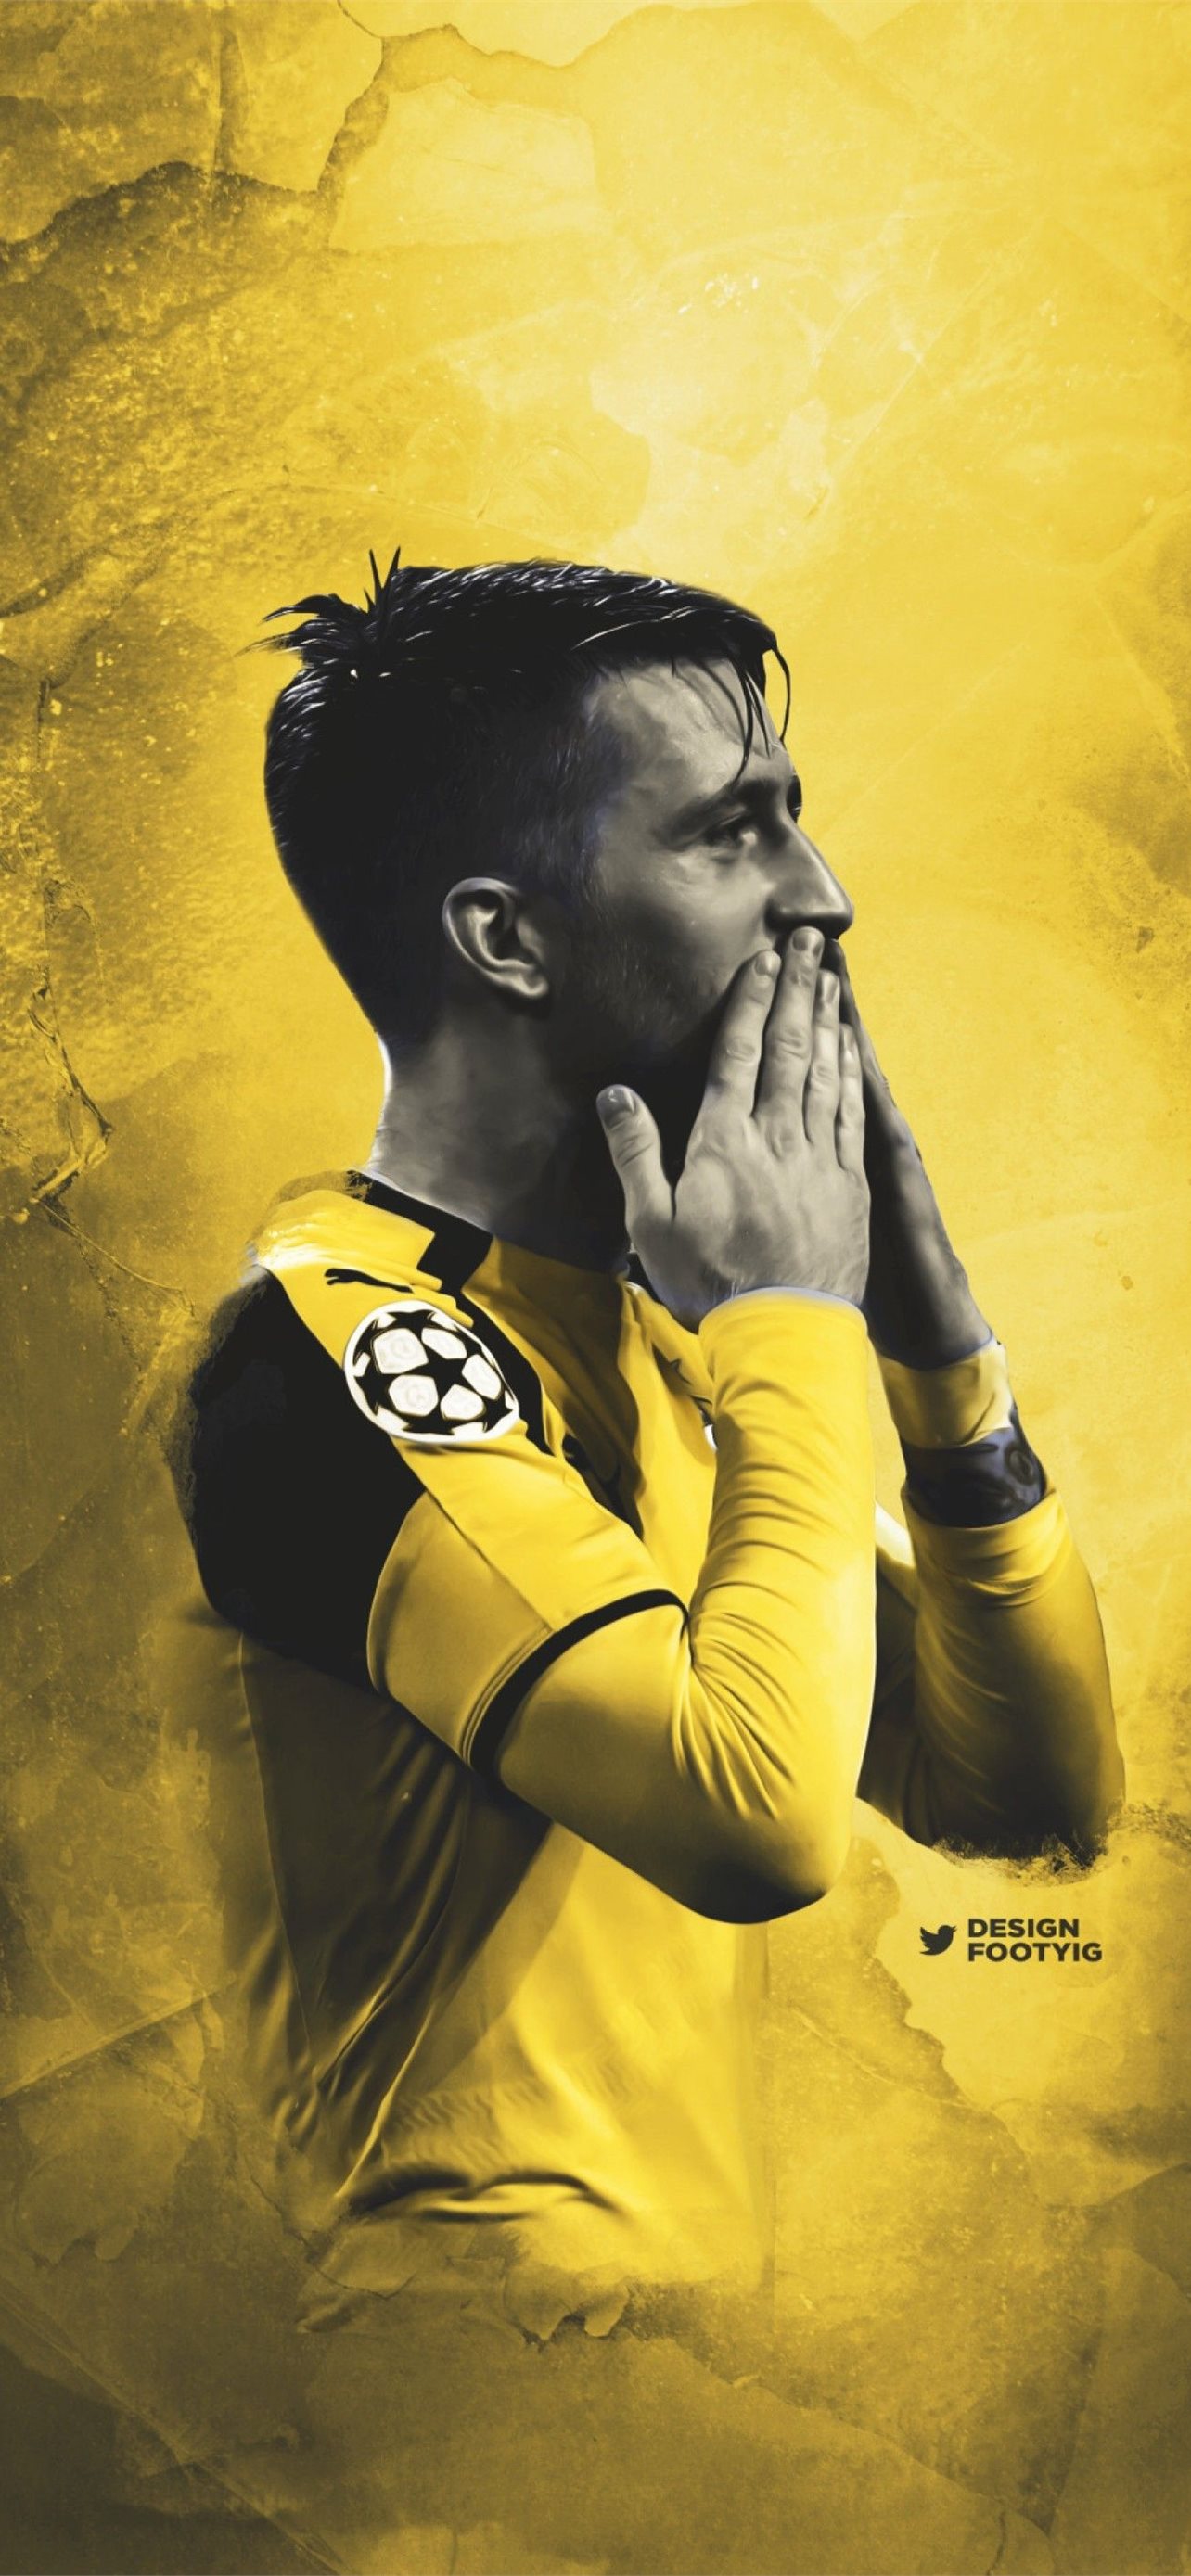 How Borussia Dortmund Altered Content Strategy During the Sports Pause